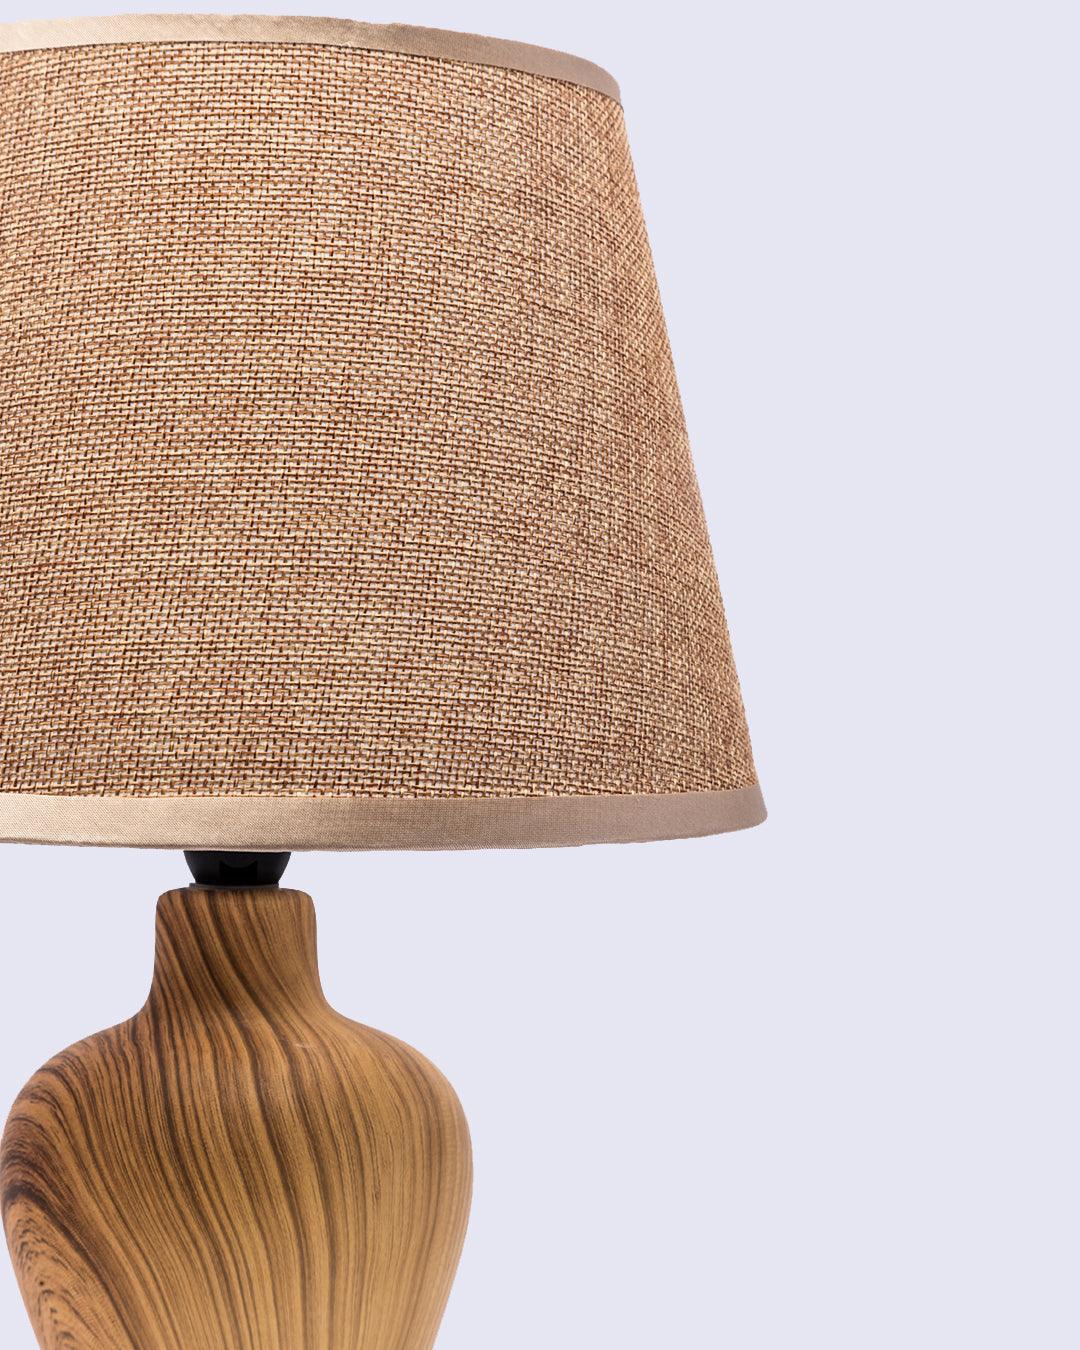 Market99 Table Lamp, with Shade, S Shape, Golden Colour, Ceramic - MARKET 99